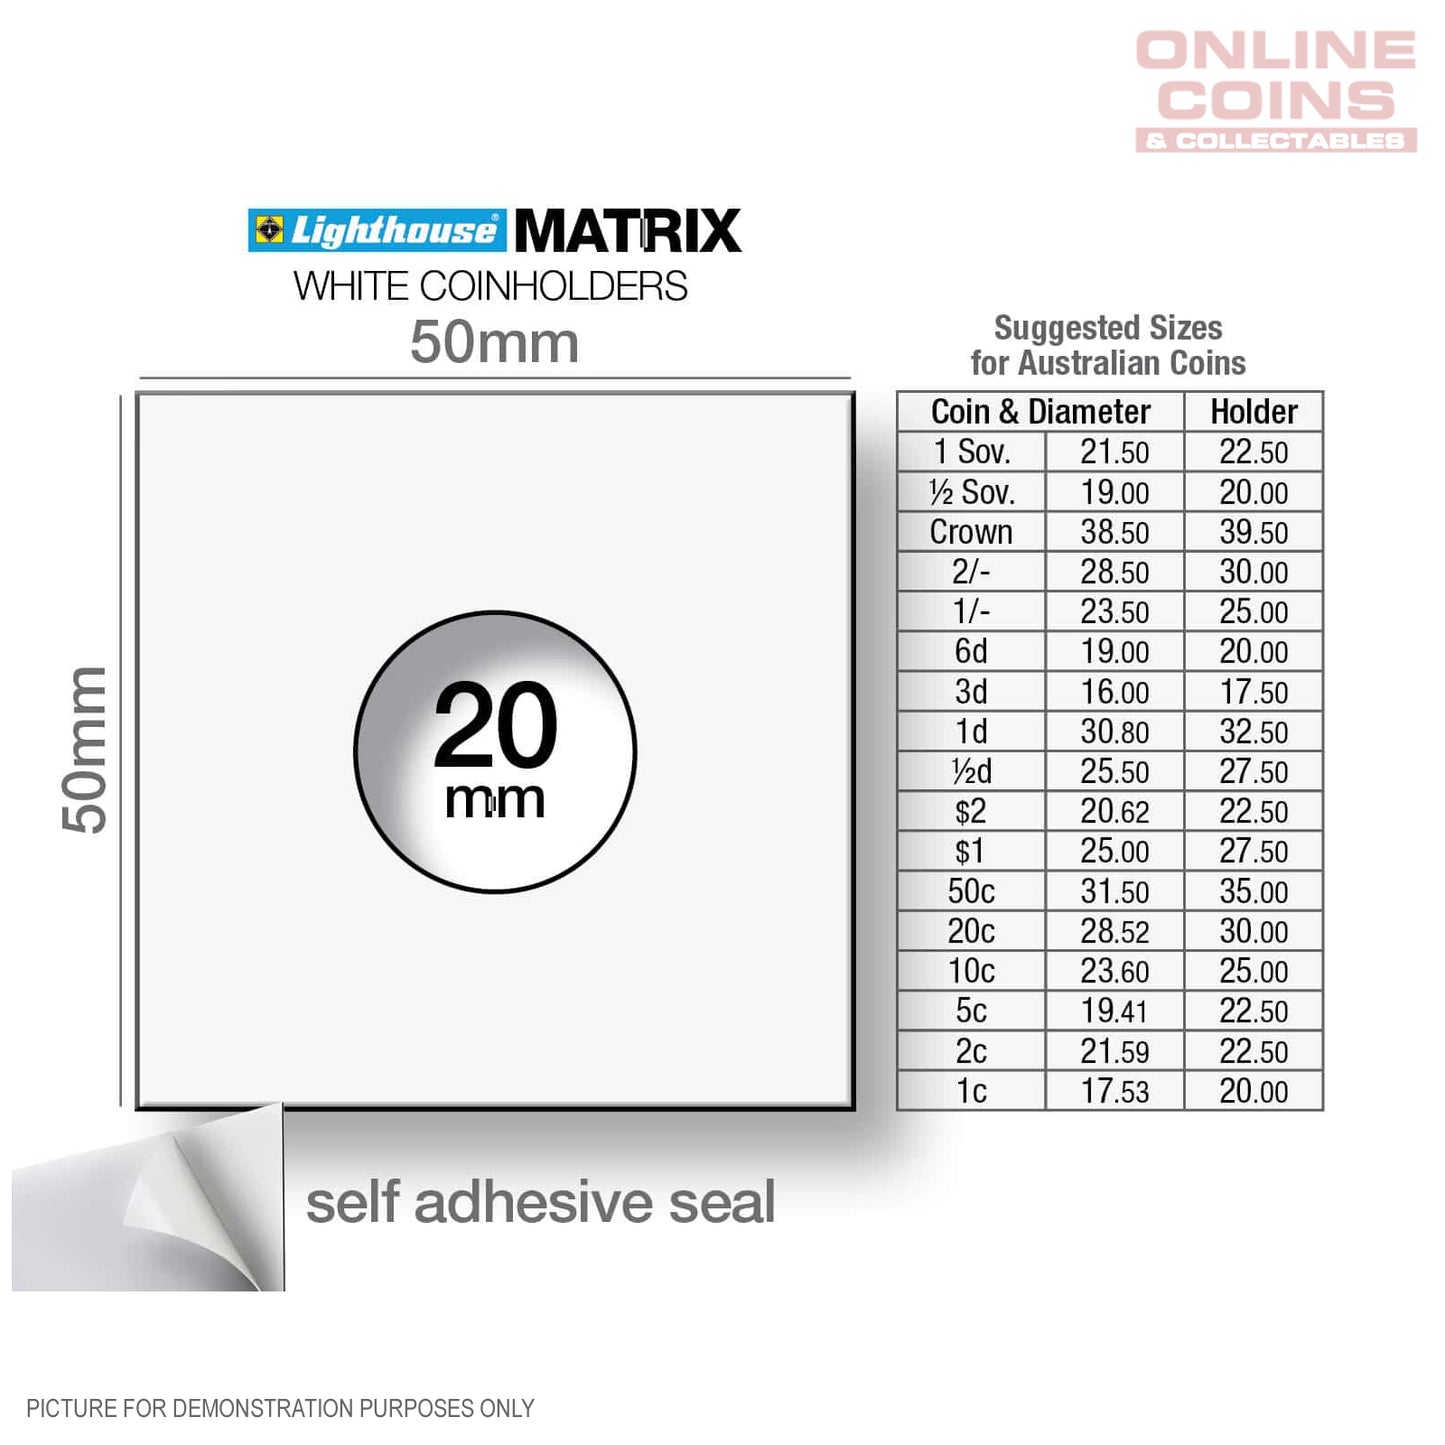 Lighthouse MATRIX WHITE 20mm Self Adhesive 2"x2" Coin Holders (Suitable For Australian 1c, 5c, Sixpence And Half Sovereigns)